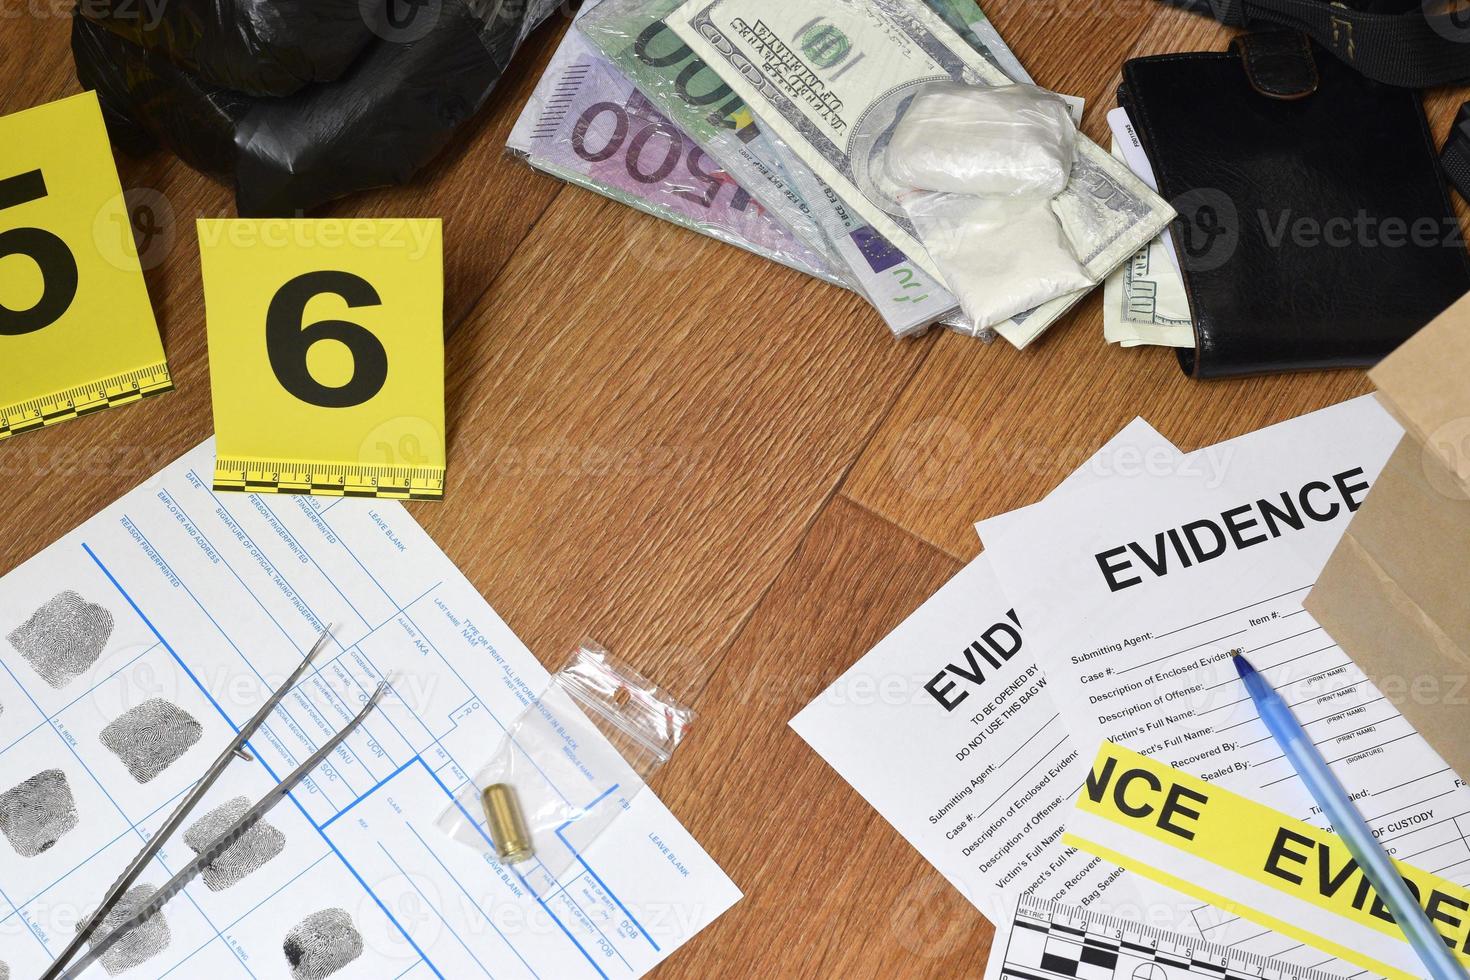 Evidence Chain of Custody Labels and brown paper bag with fingerprints applicant card lies against big heroin packets and packs of money bills as evidence in crime scene investigation process photo